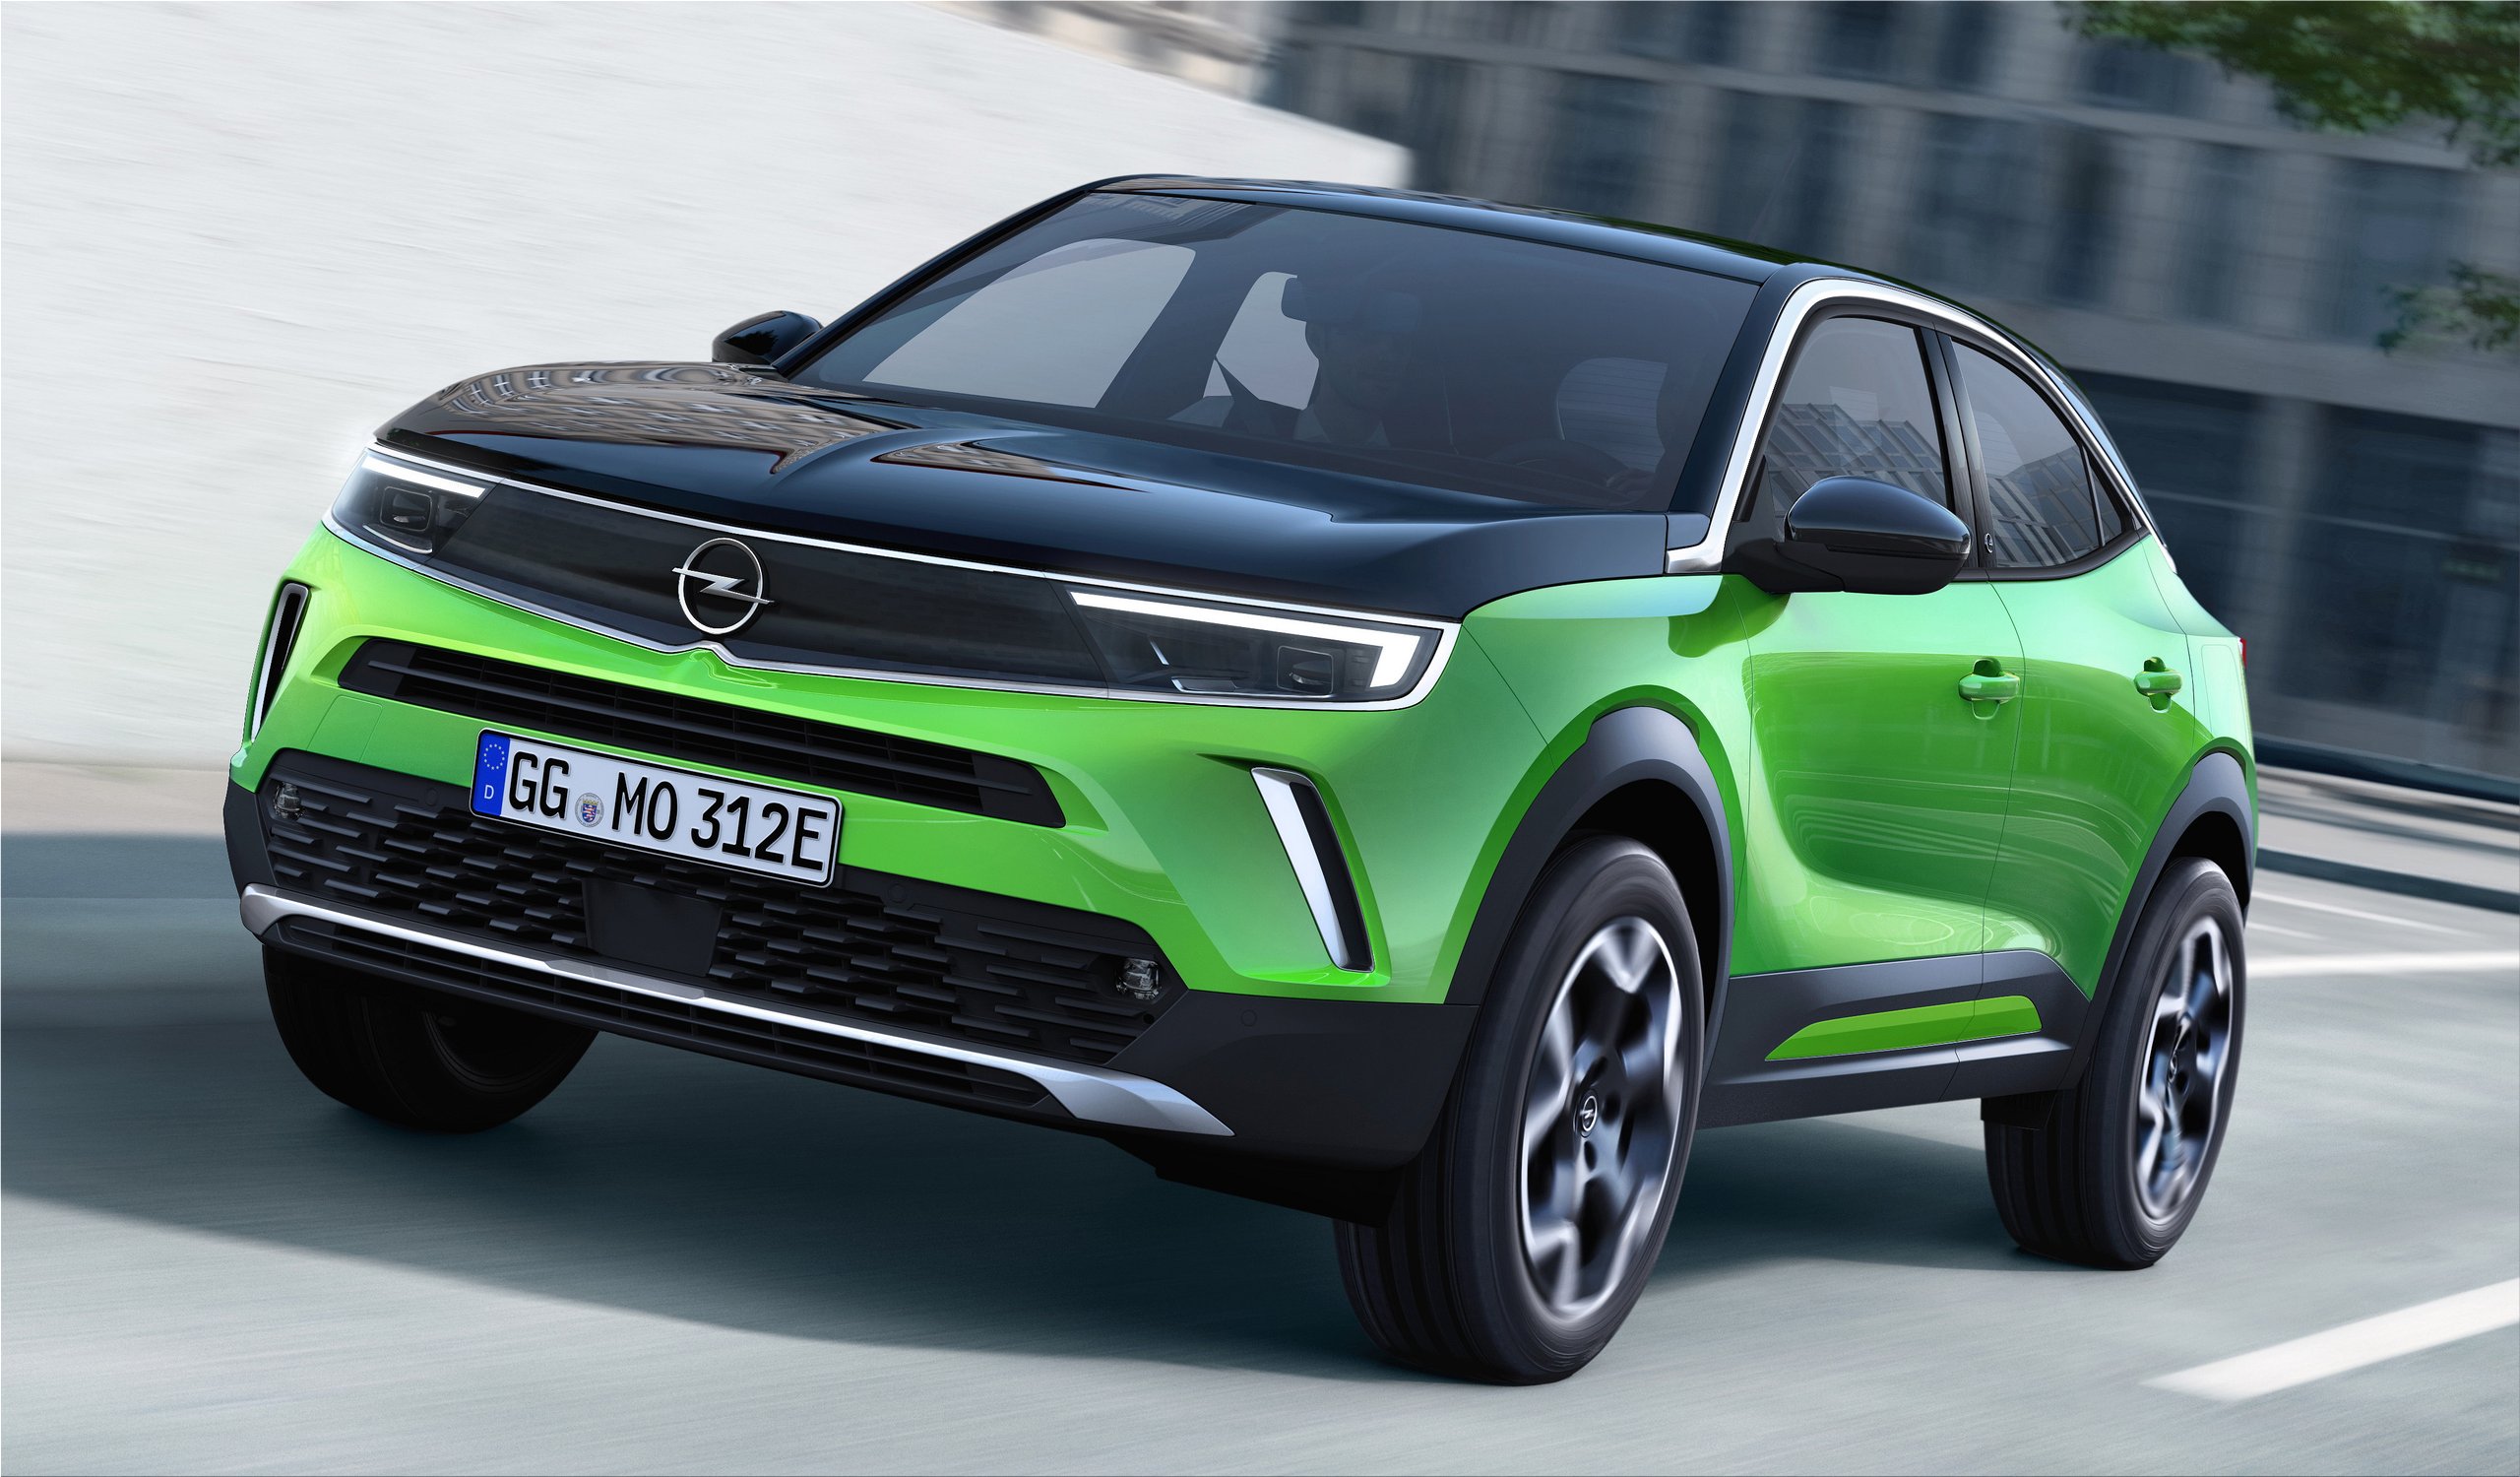 The new Opel Mokkae electric compact SUV with 136 hp and a 50 kWh